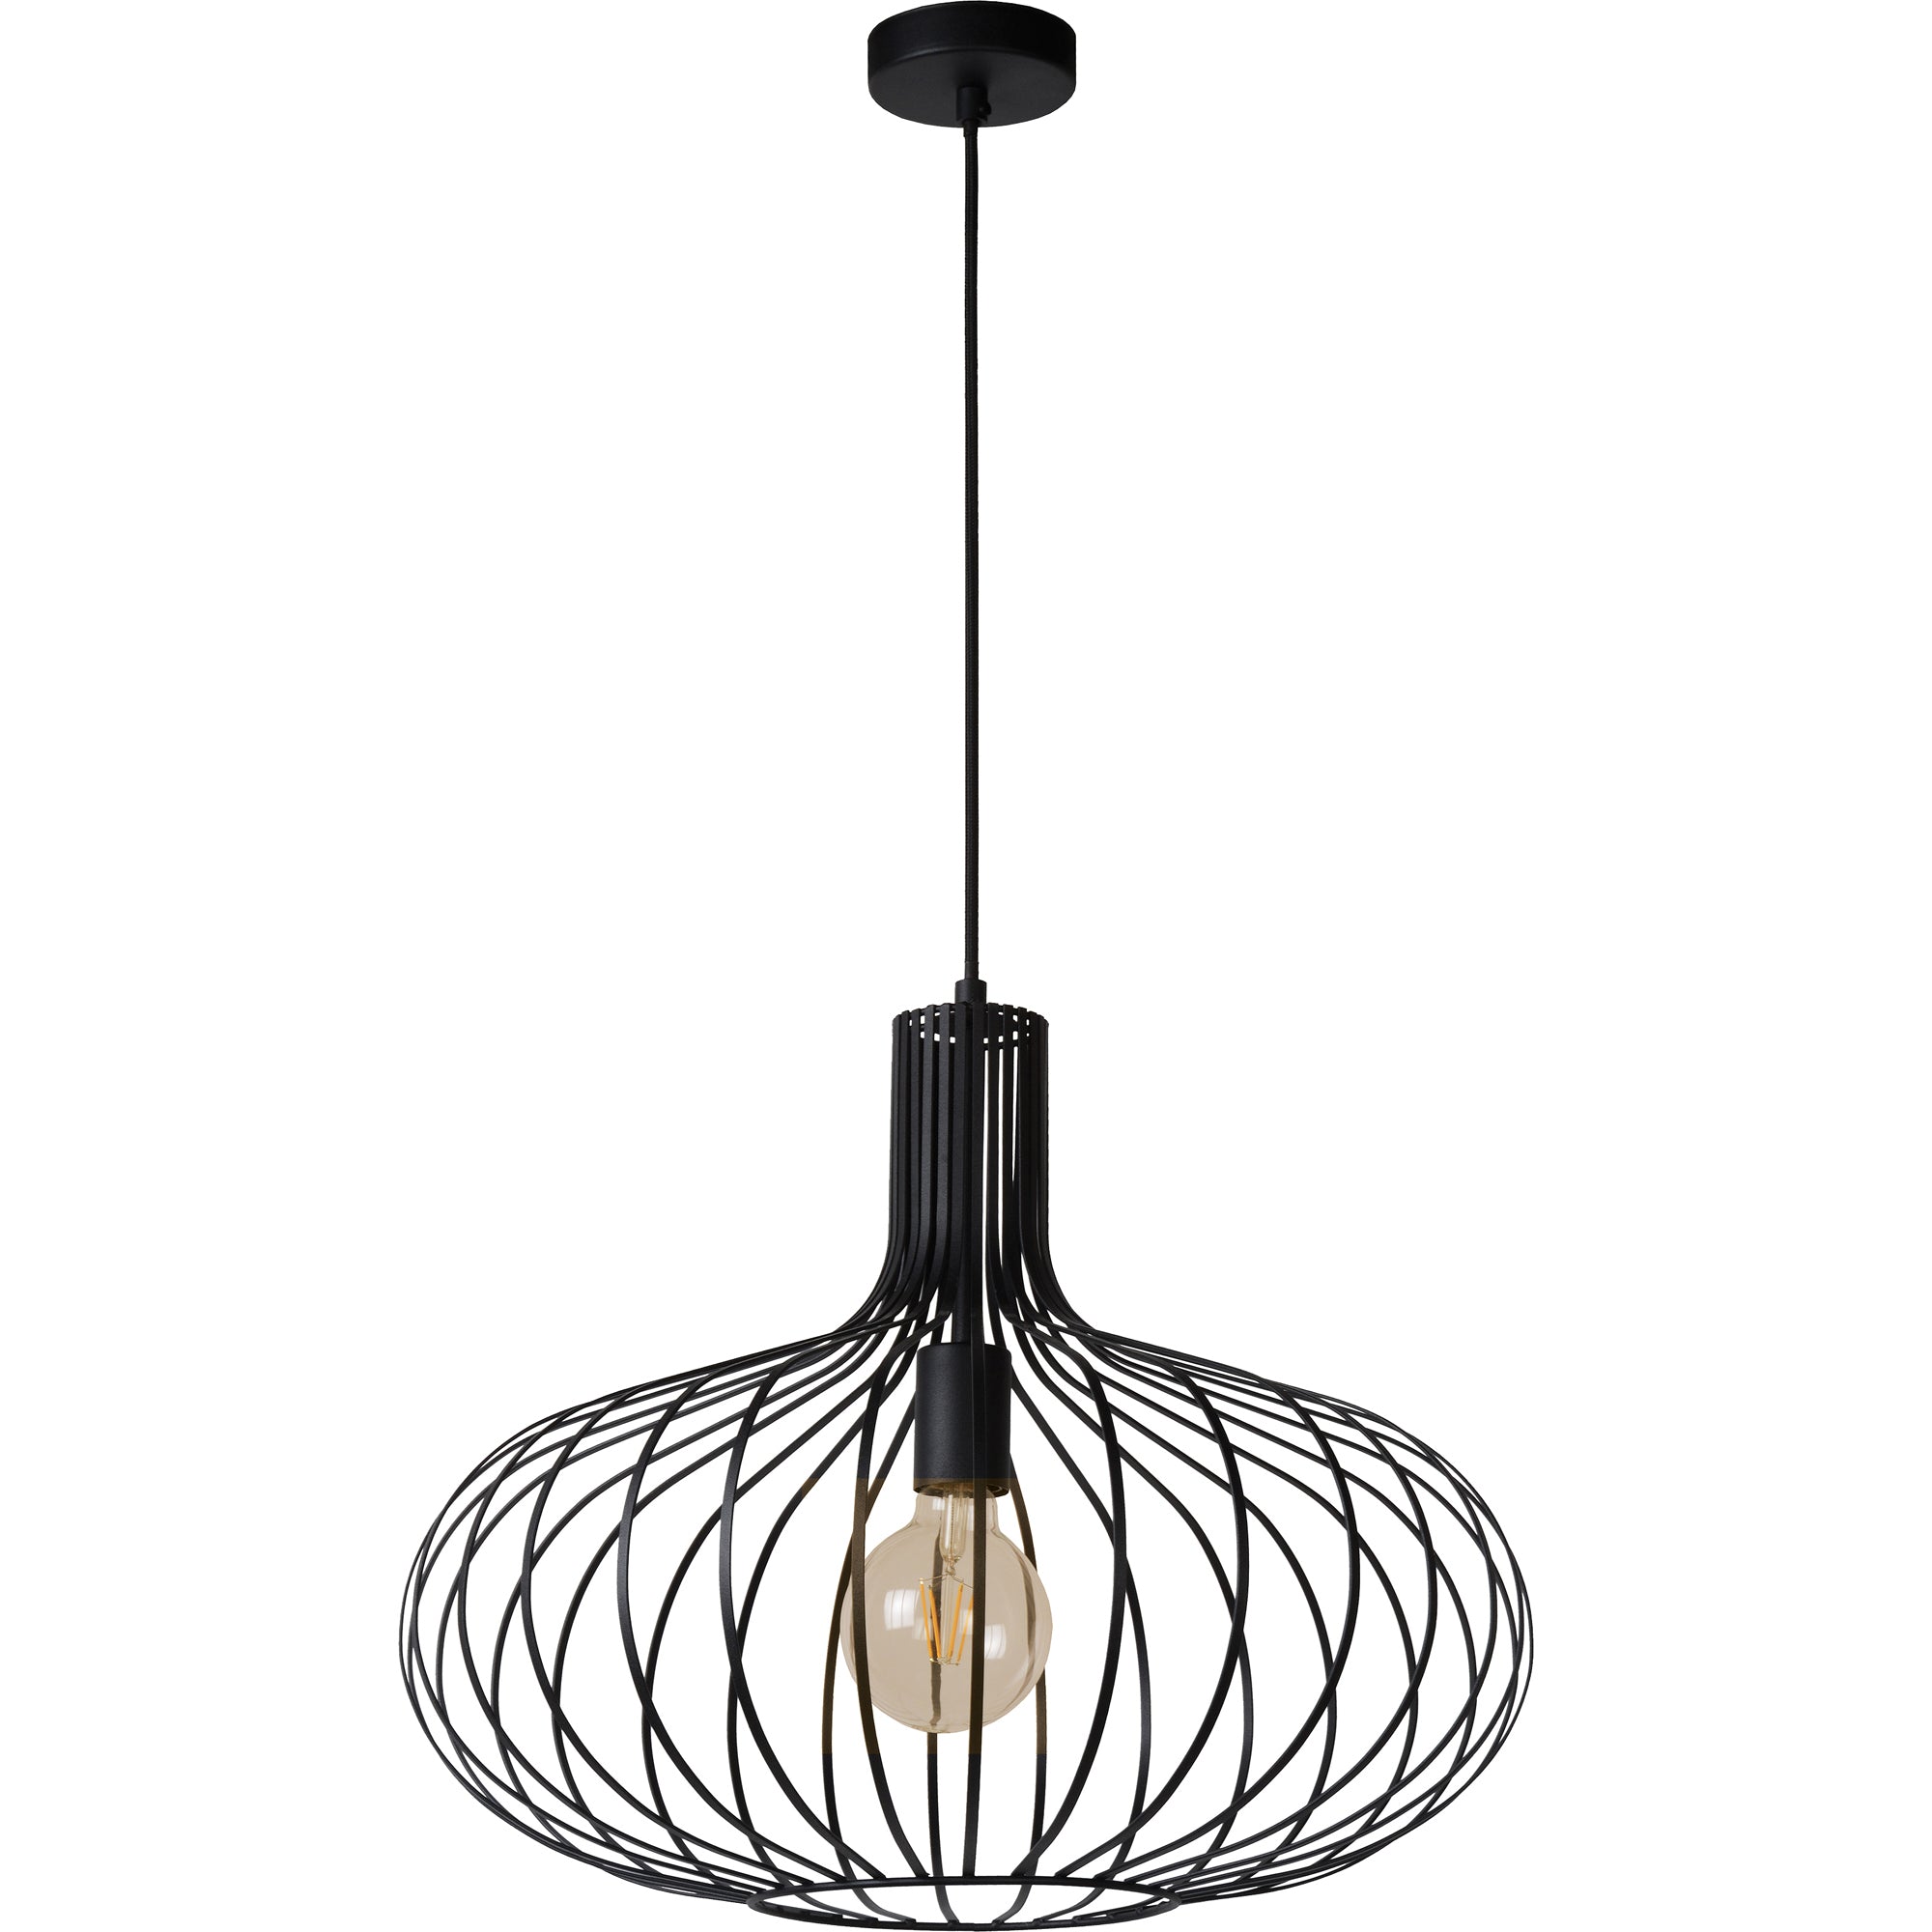 Ione 20" Iron - Powder Coated Ceiling Light